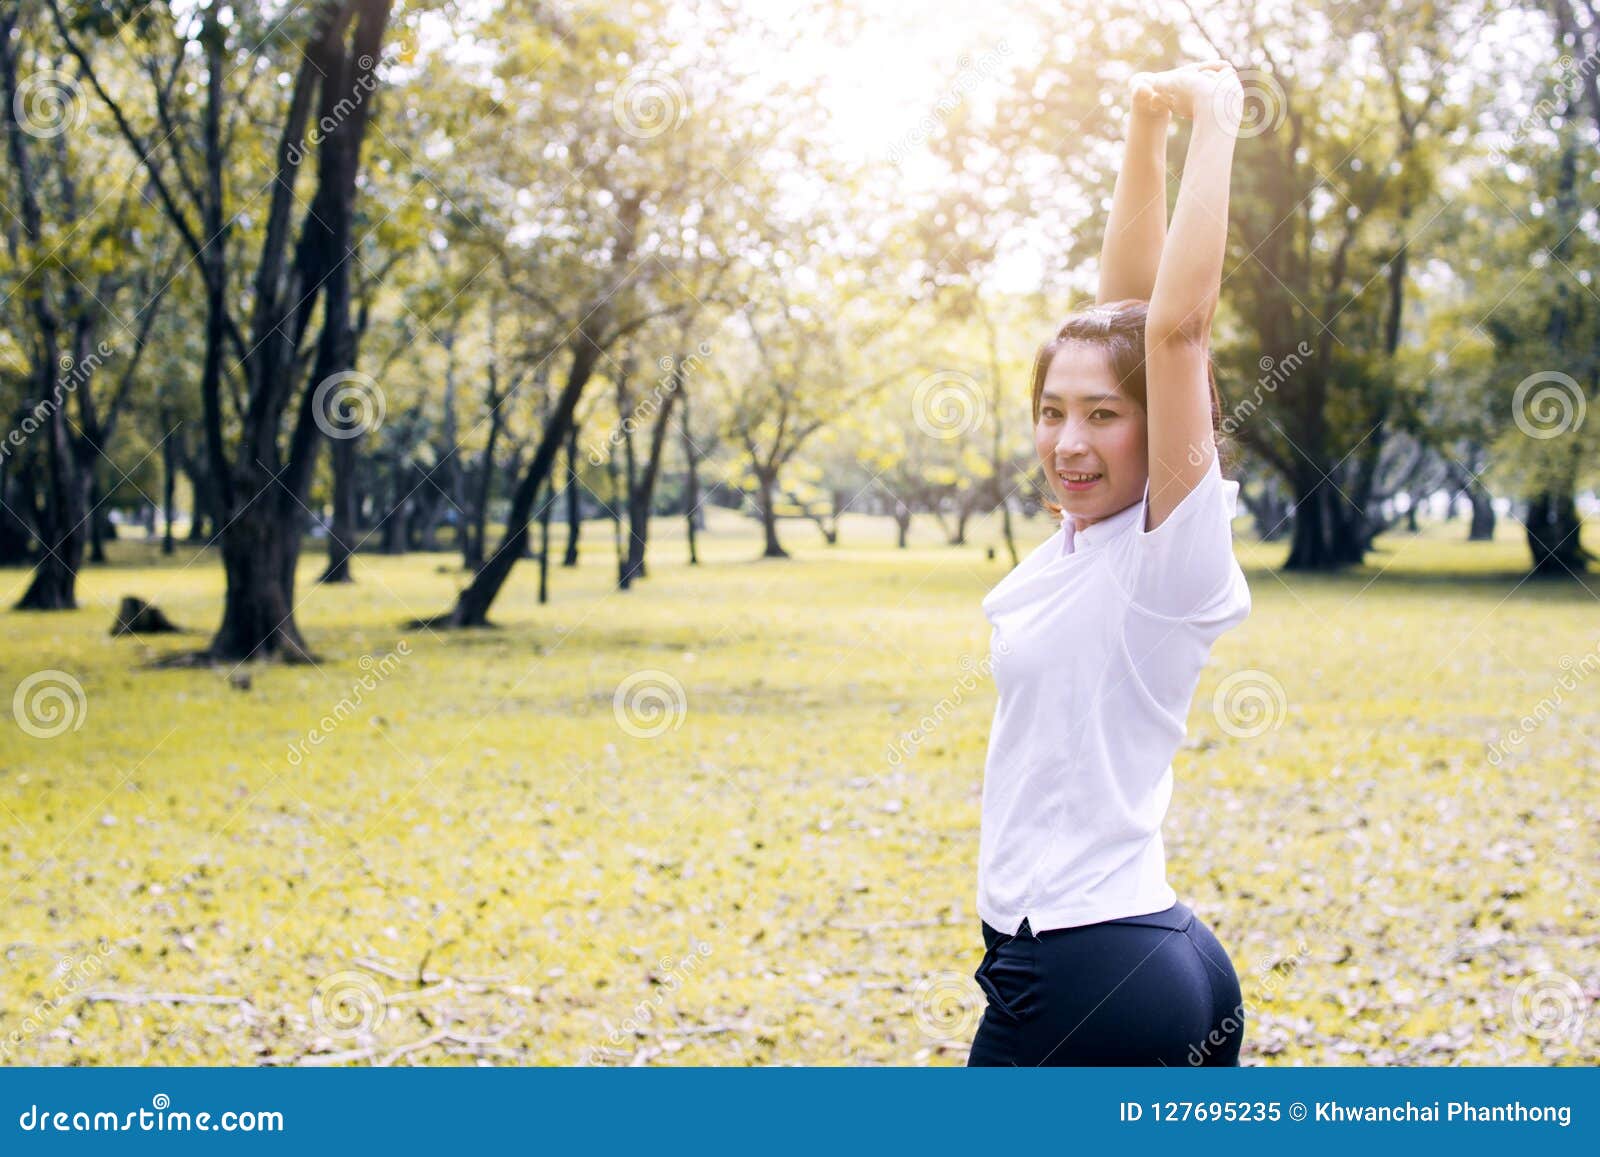 Sport Woman Exercise and Worm Up in Park in Morning Stock Image - Image ...